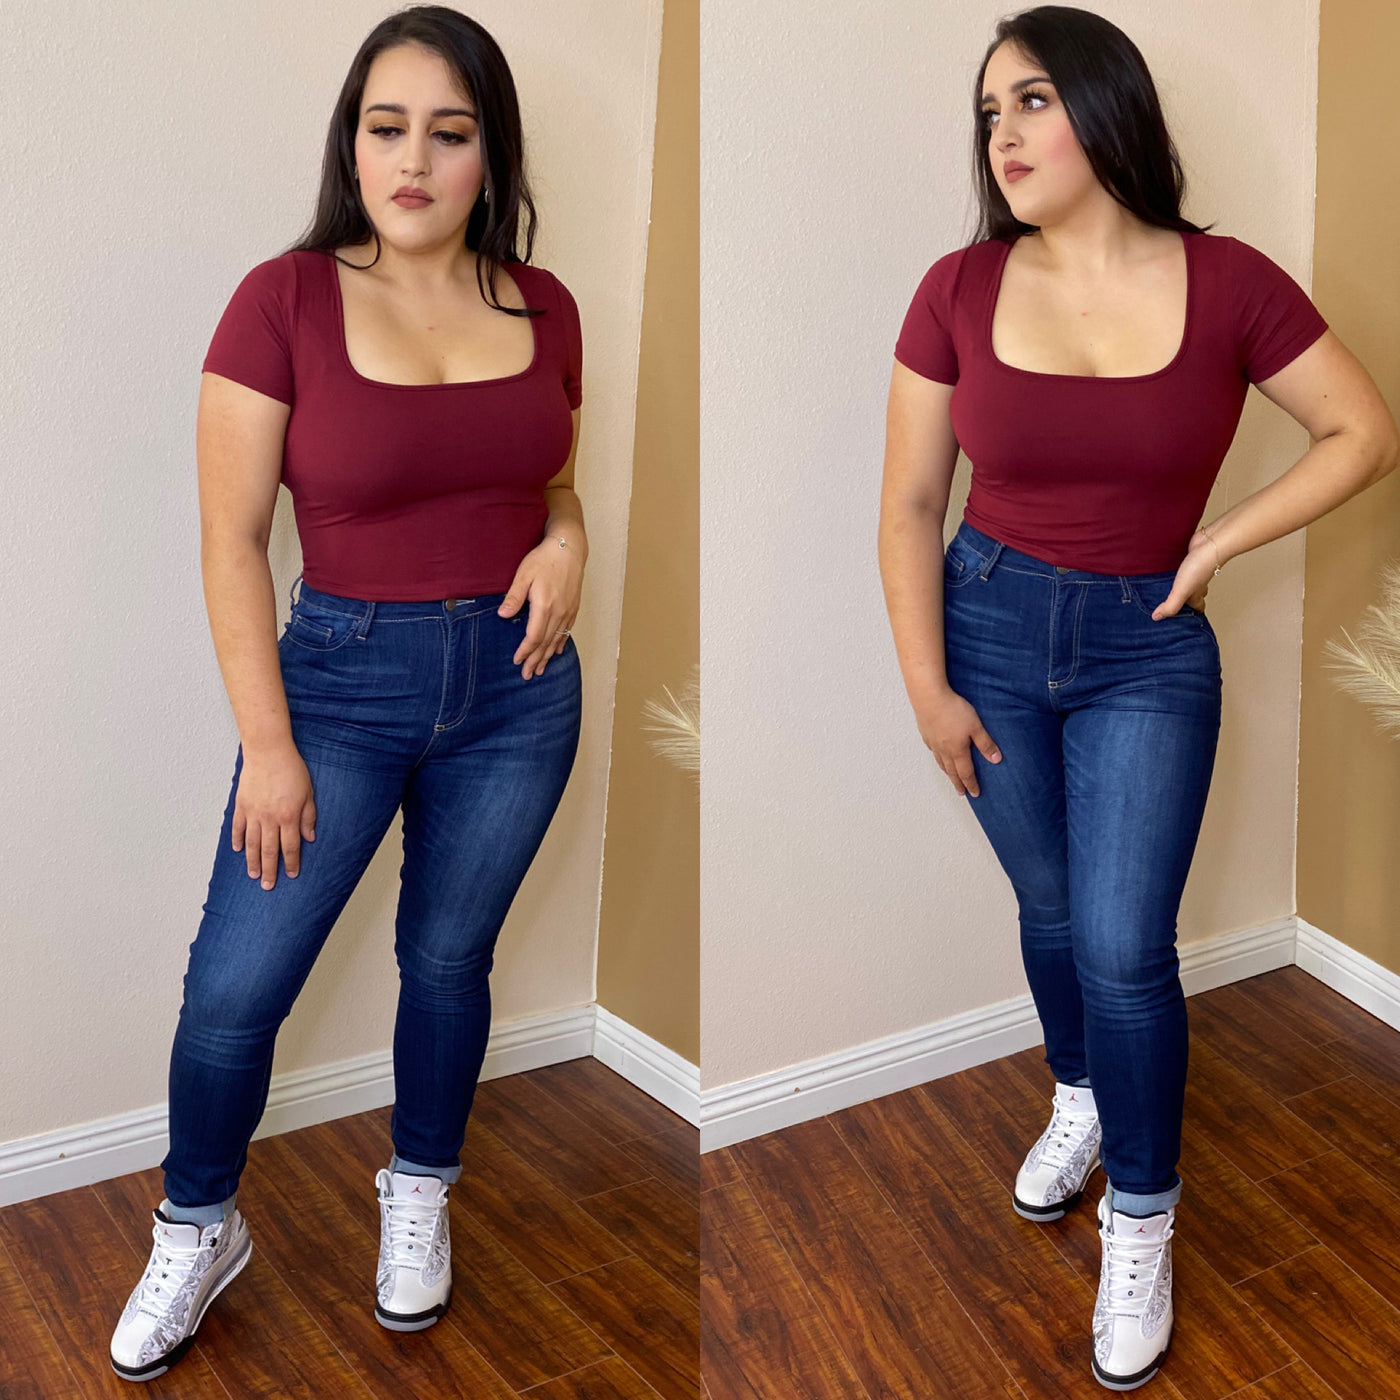 Your Fave Crop Top (Burgundy)